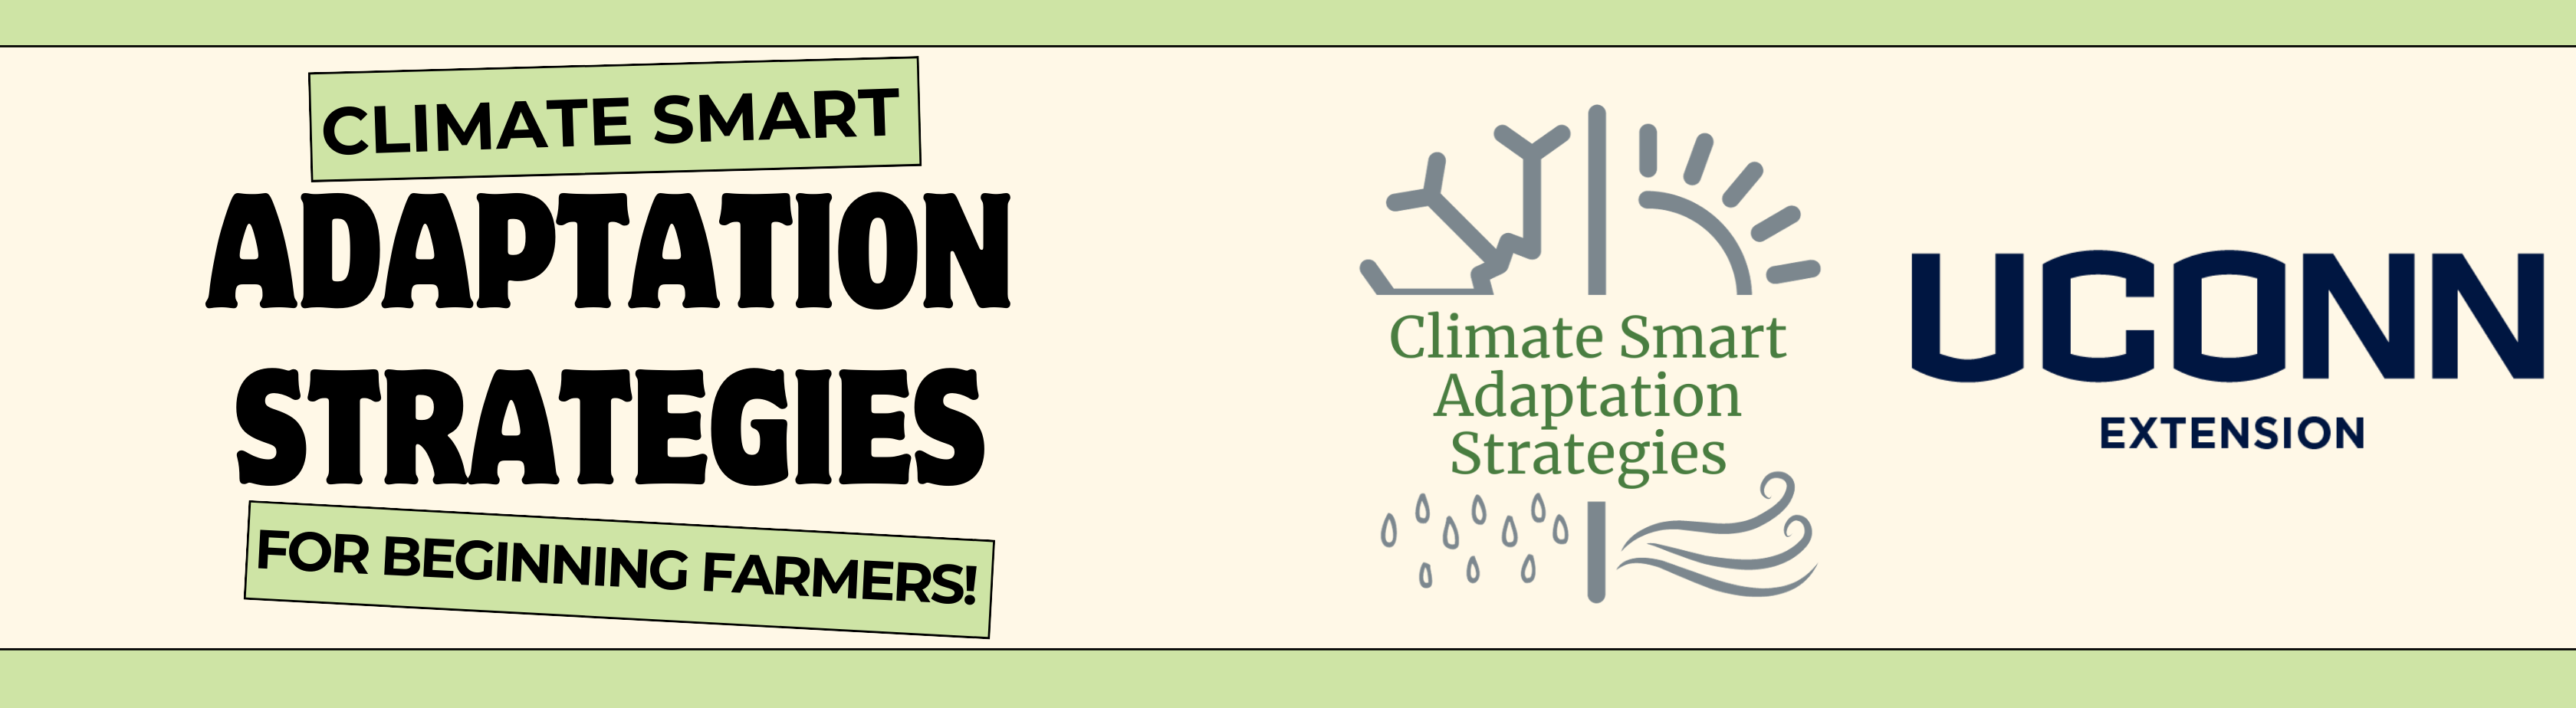 Climate Smart Adaptation Strategies for Beginning Farmers a project of UConn Extension